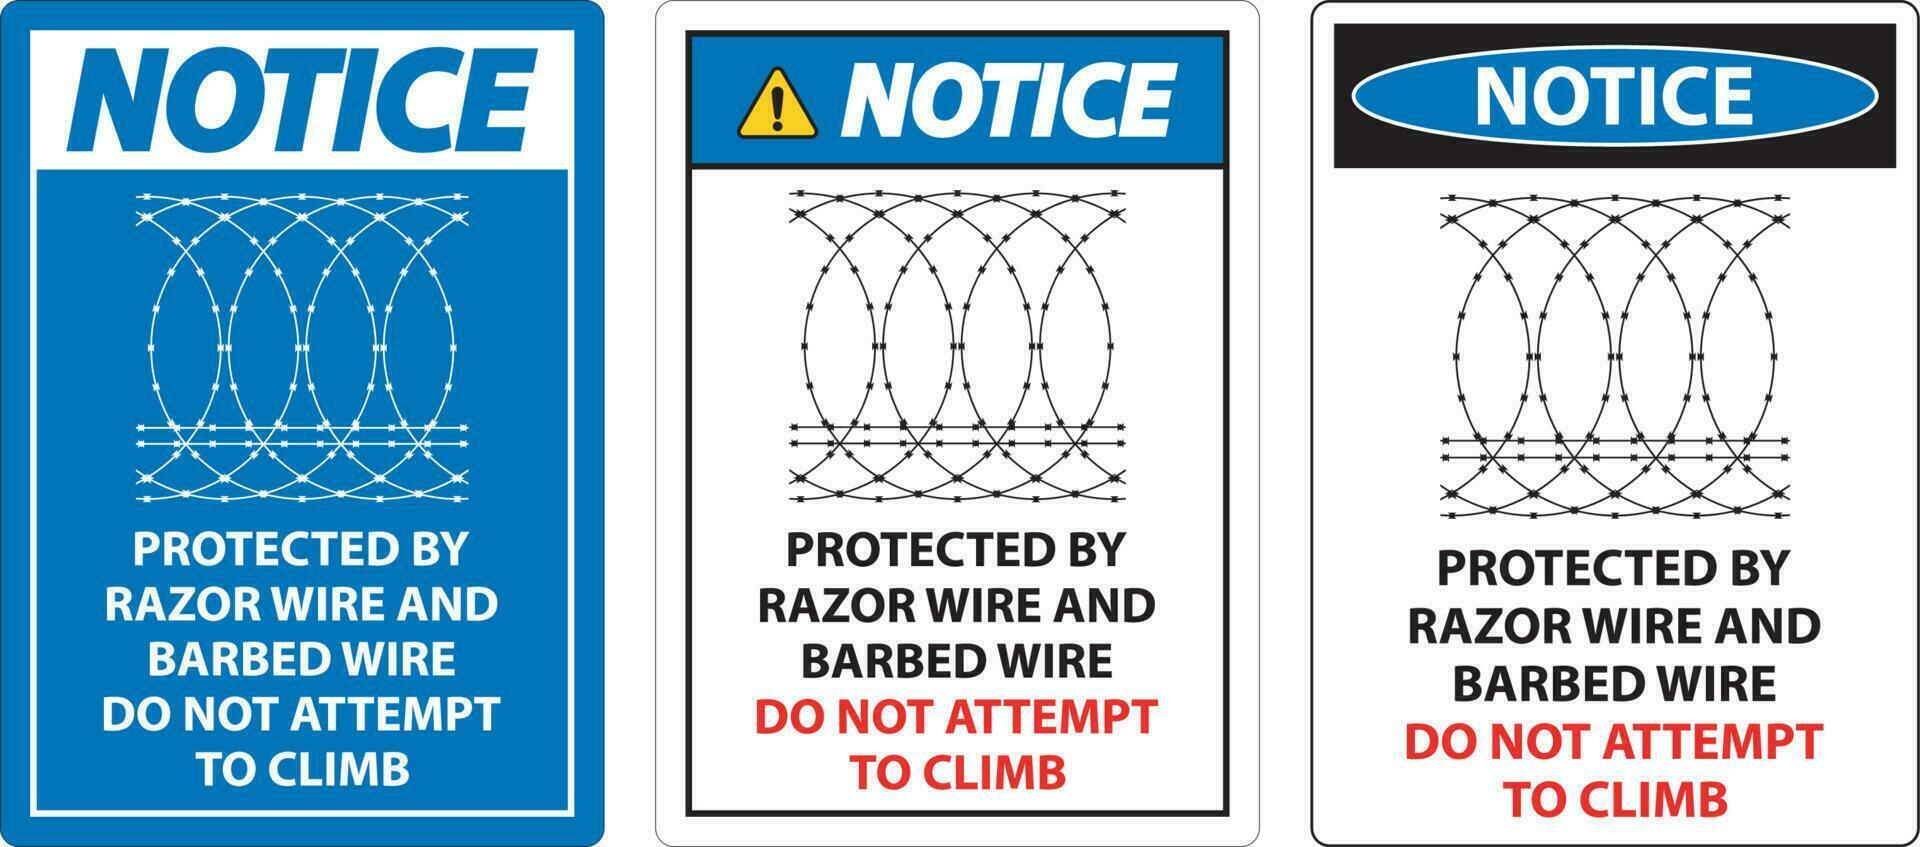 Notice Protected By Razor Wire and Barbed Wire, Do Not Climb Sign vector